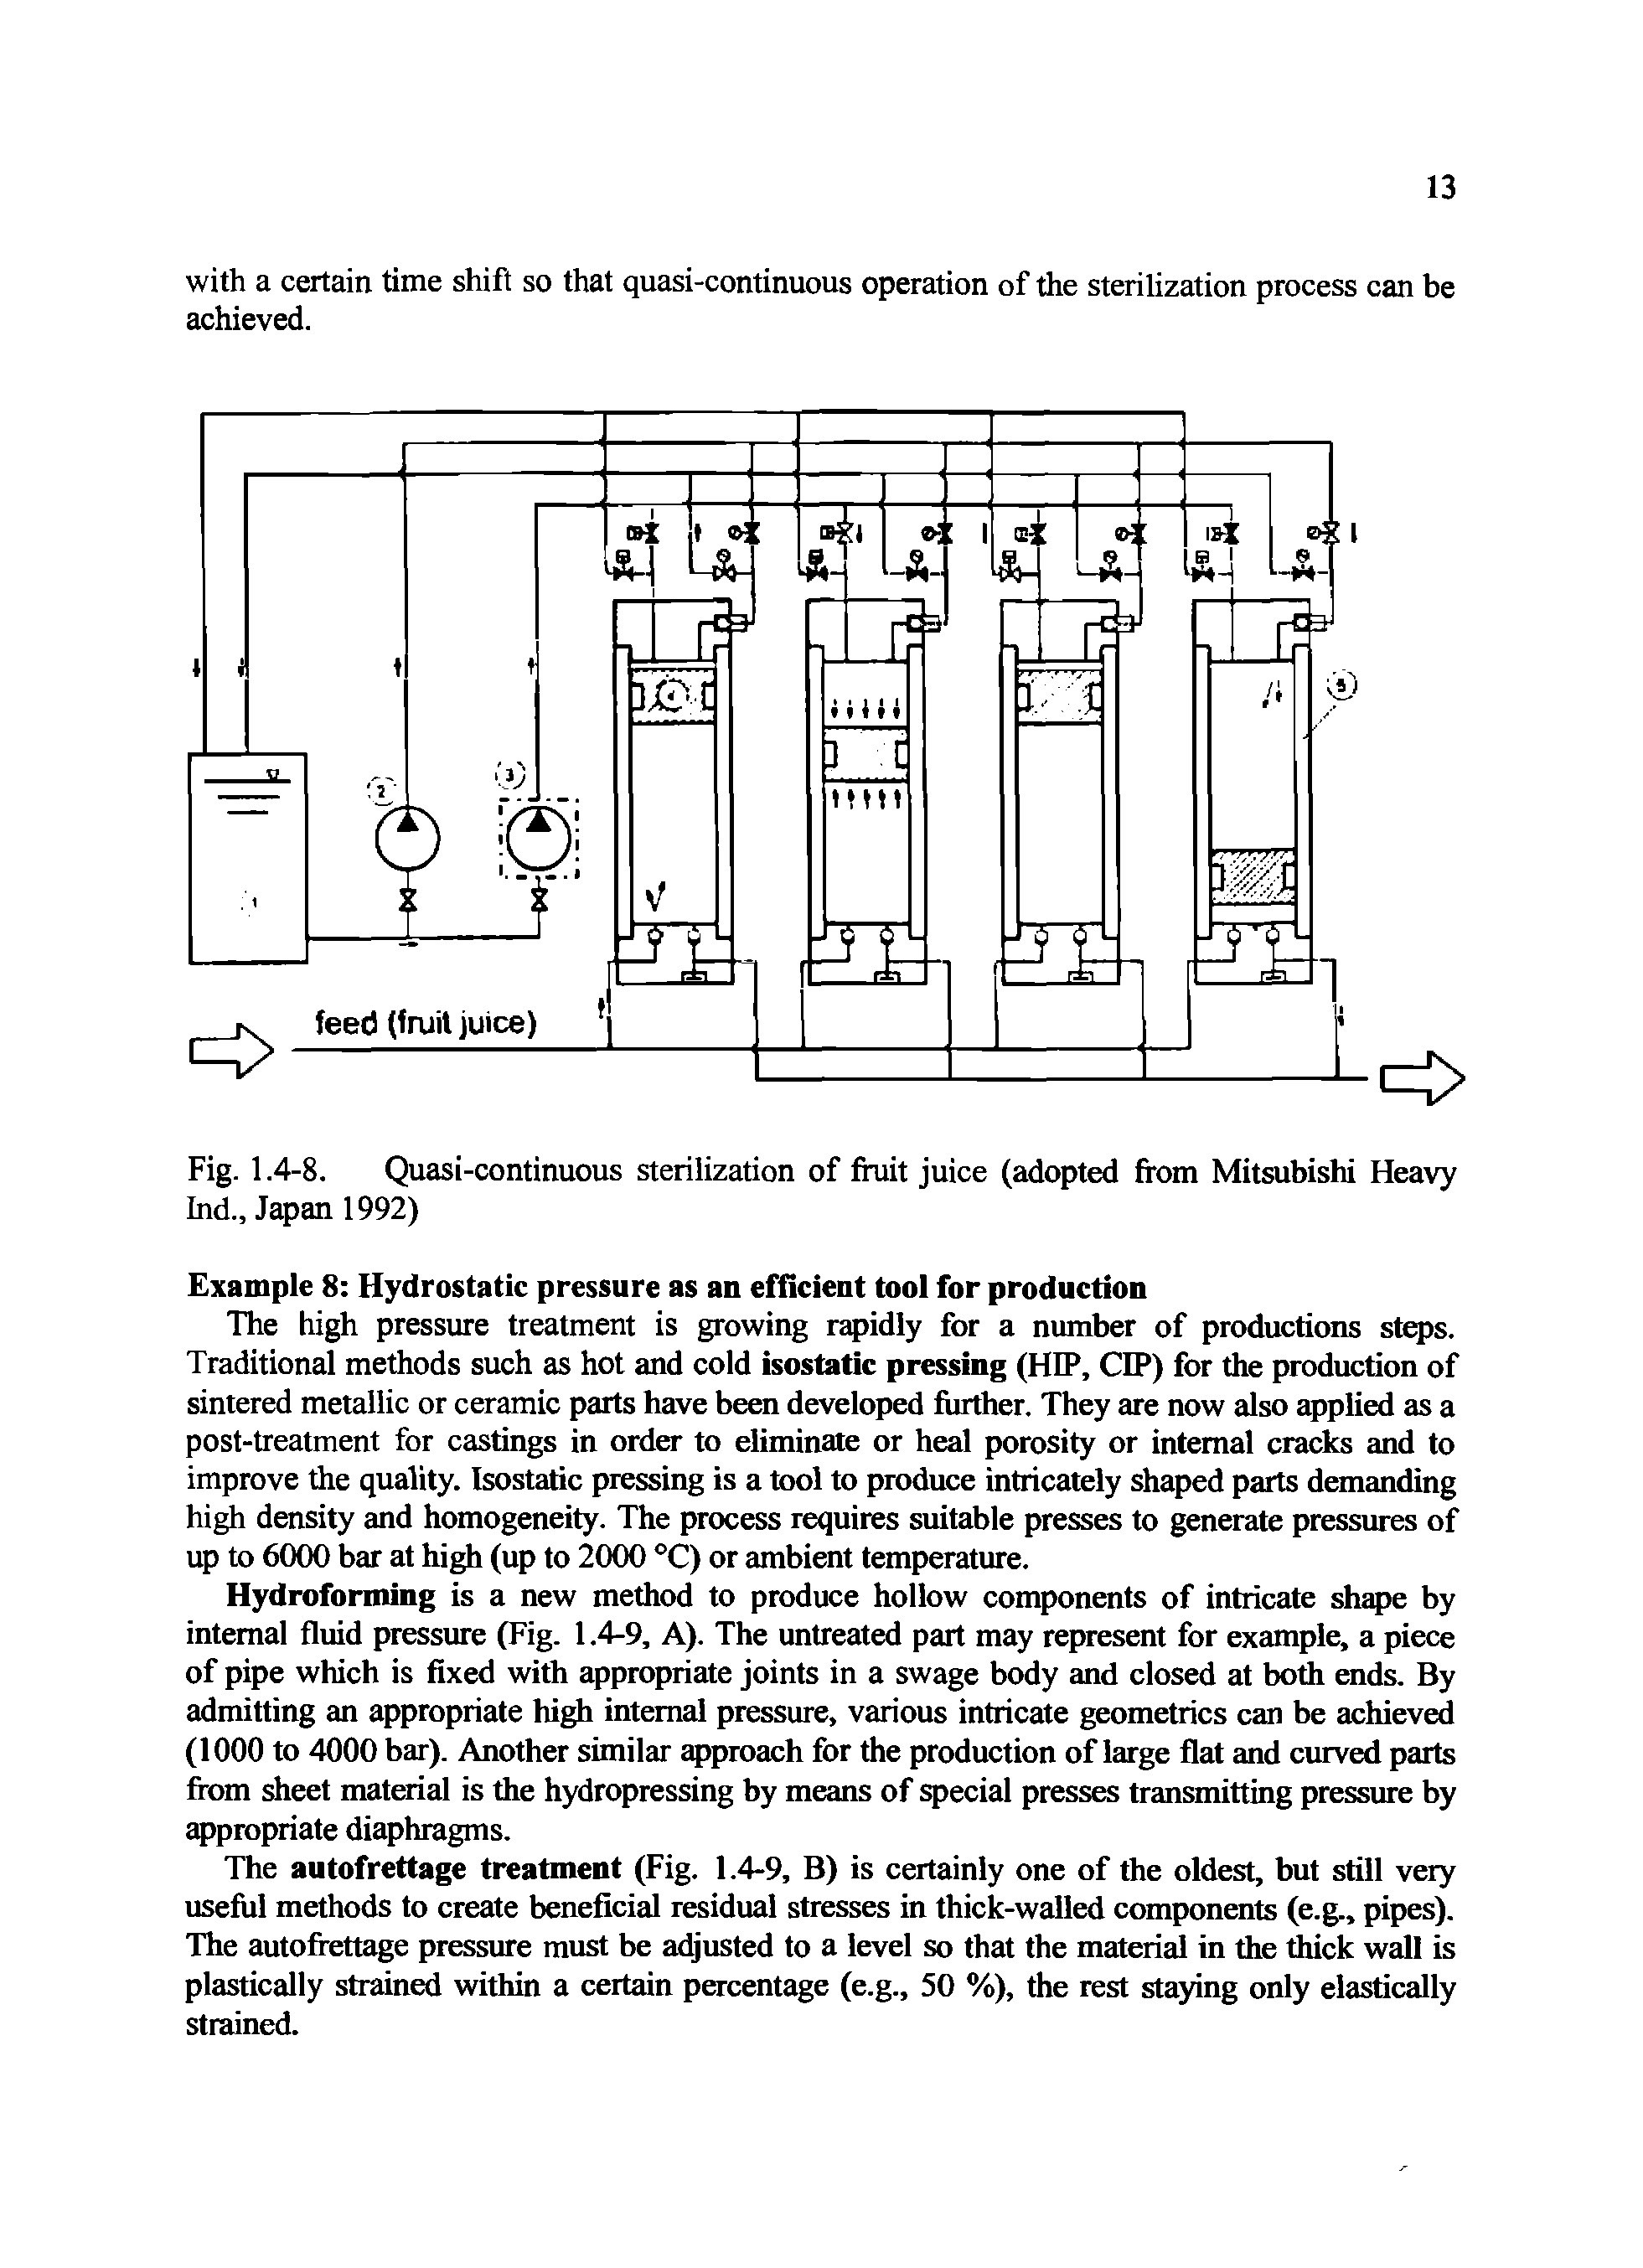 Fig. 1.4-8. Quasi-continuous sterilization of fruit juice (adopted from Mitsubishi Heavy Ind., Japan 1992)...